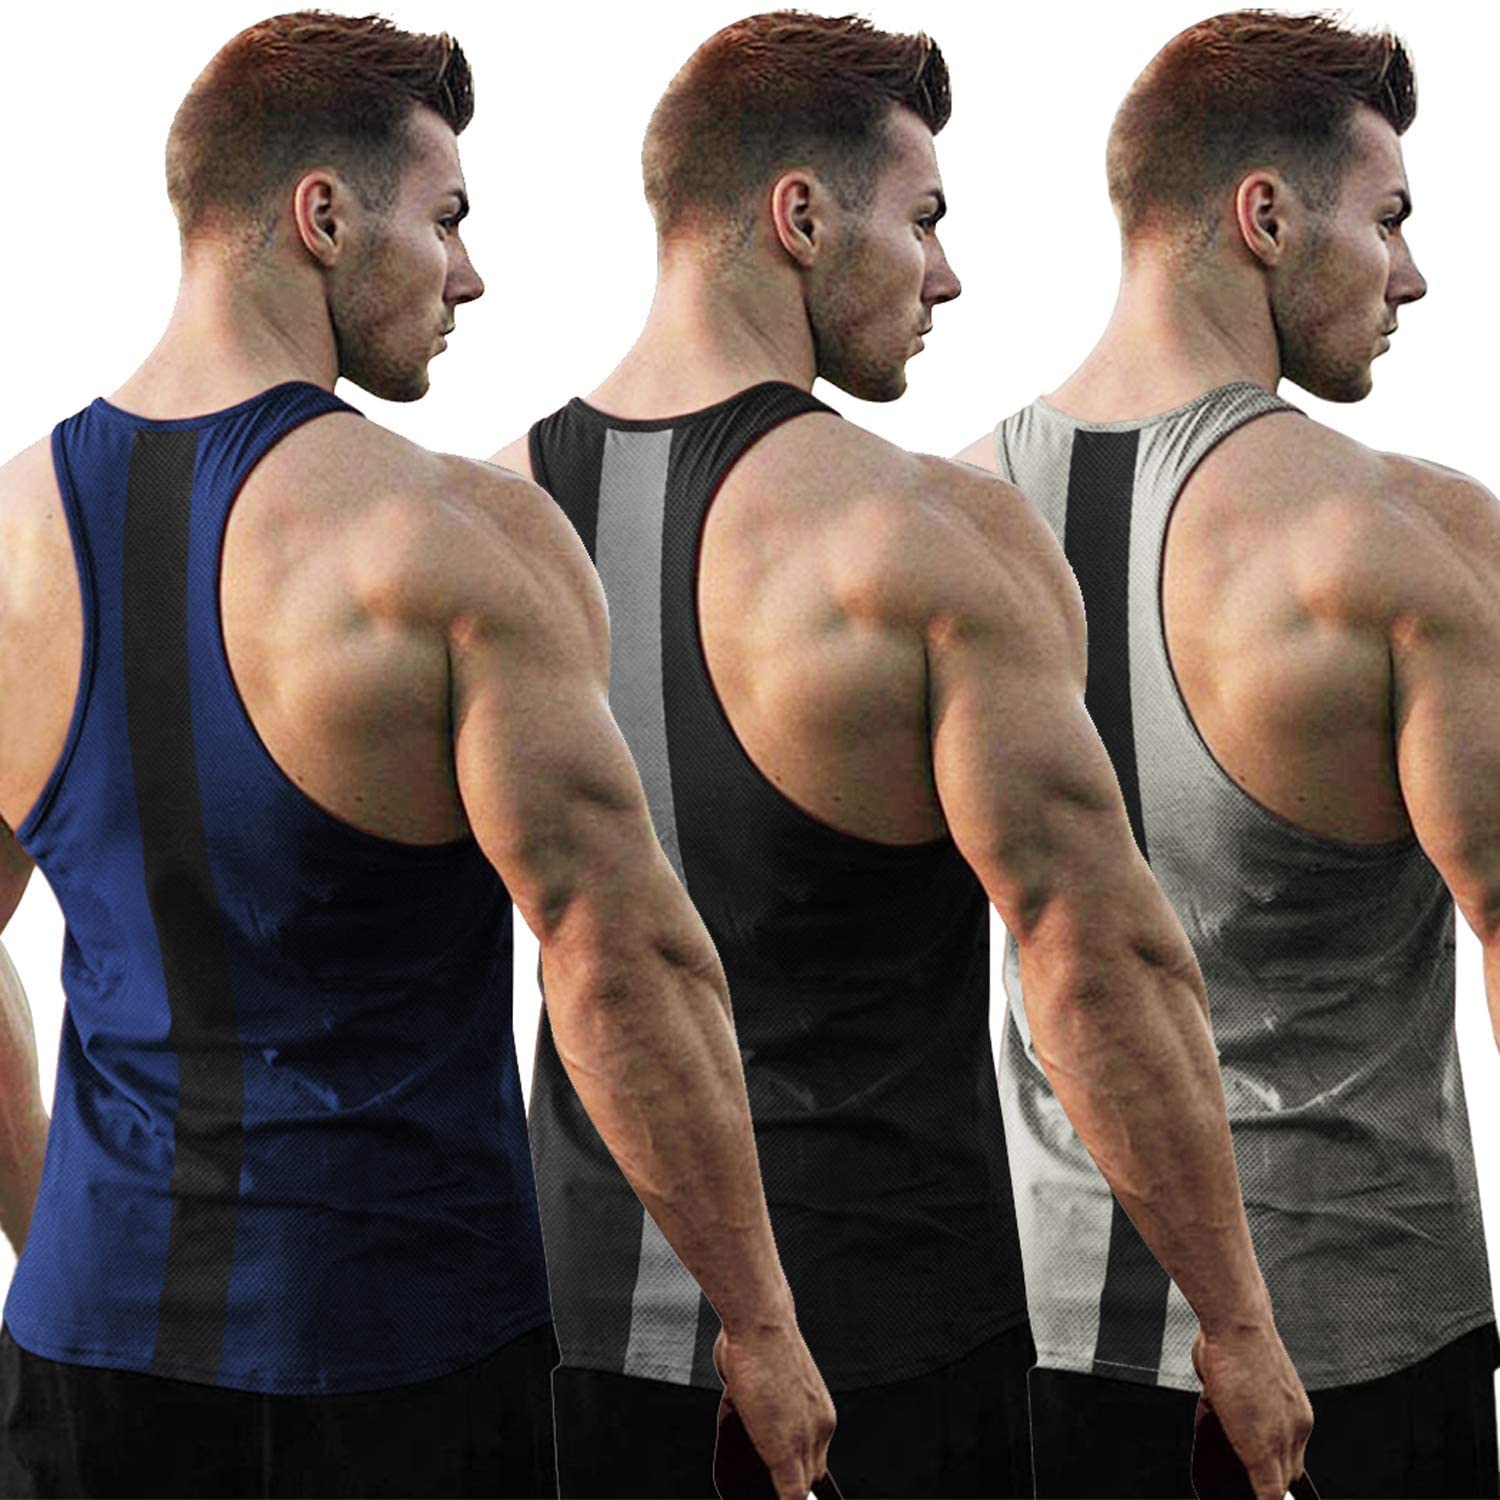 COOFANDY Men's 3 Pack Gym Tank Top Workout Muscle Sleeveless Shirts Bodybuilding Fitness T Shirts 